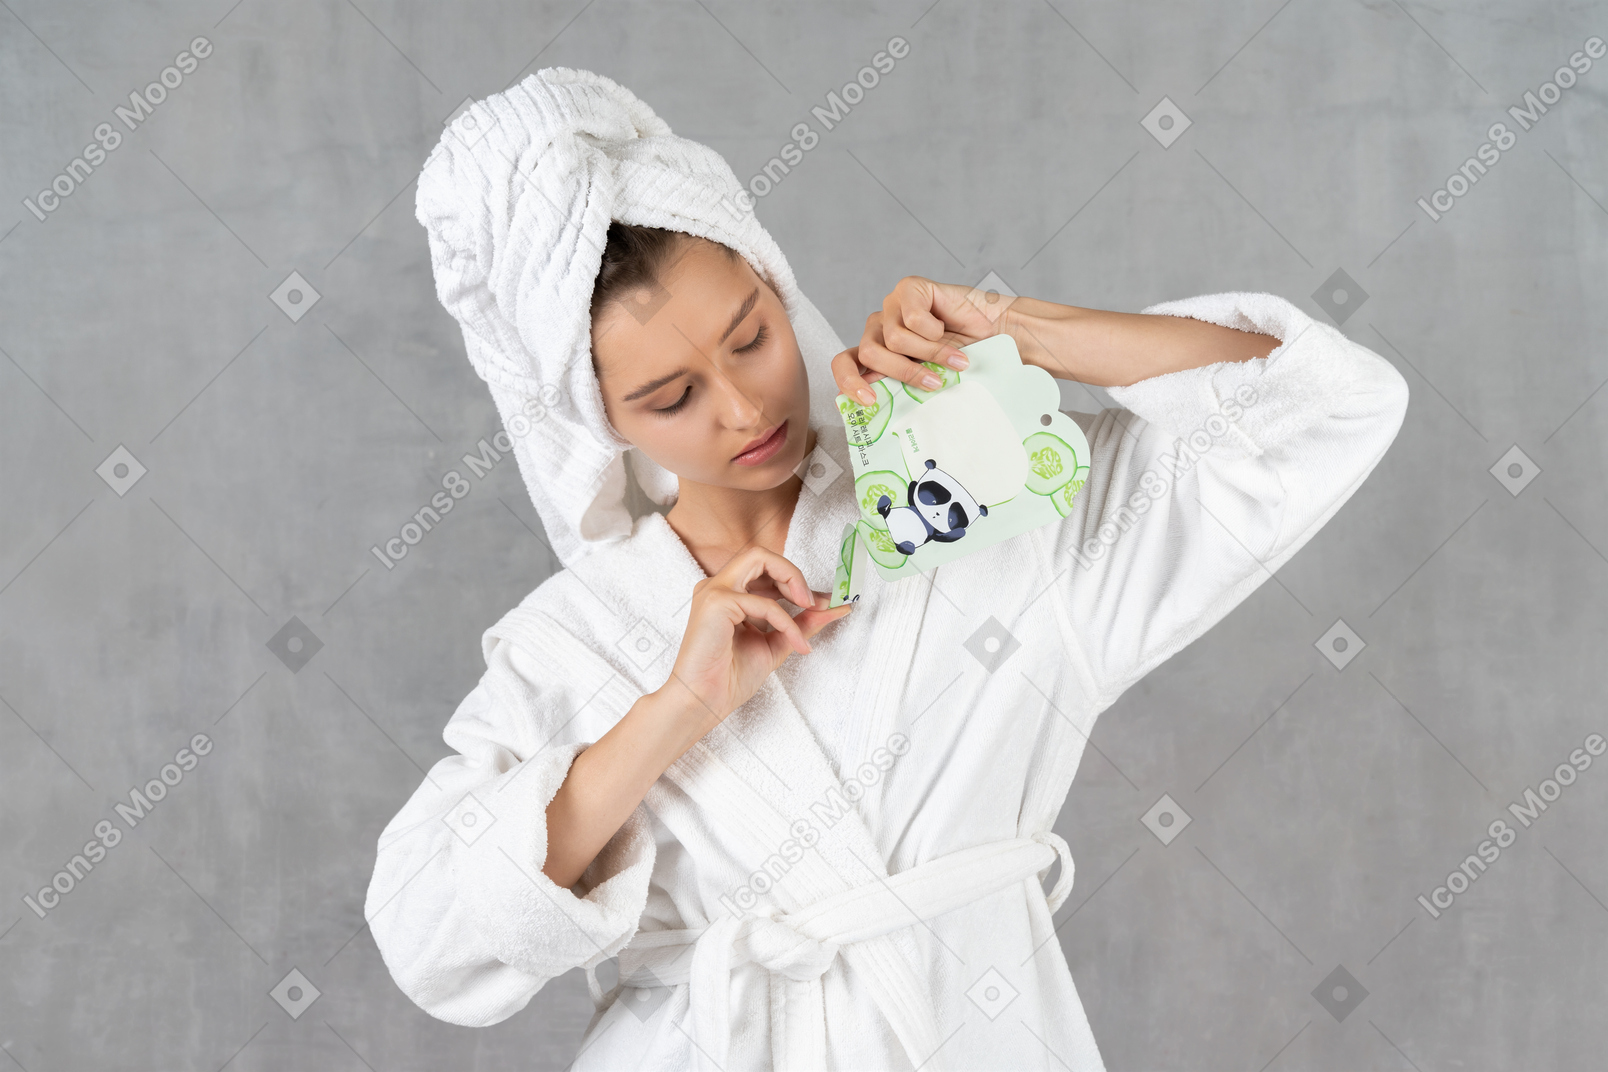 Woman in bathrobe opening a sheet mask pack